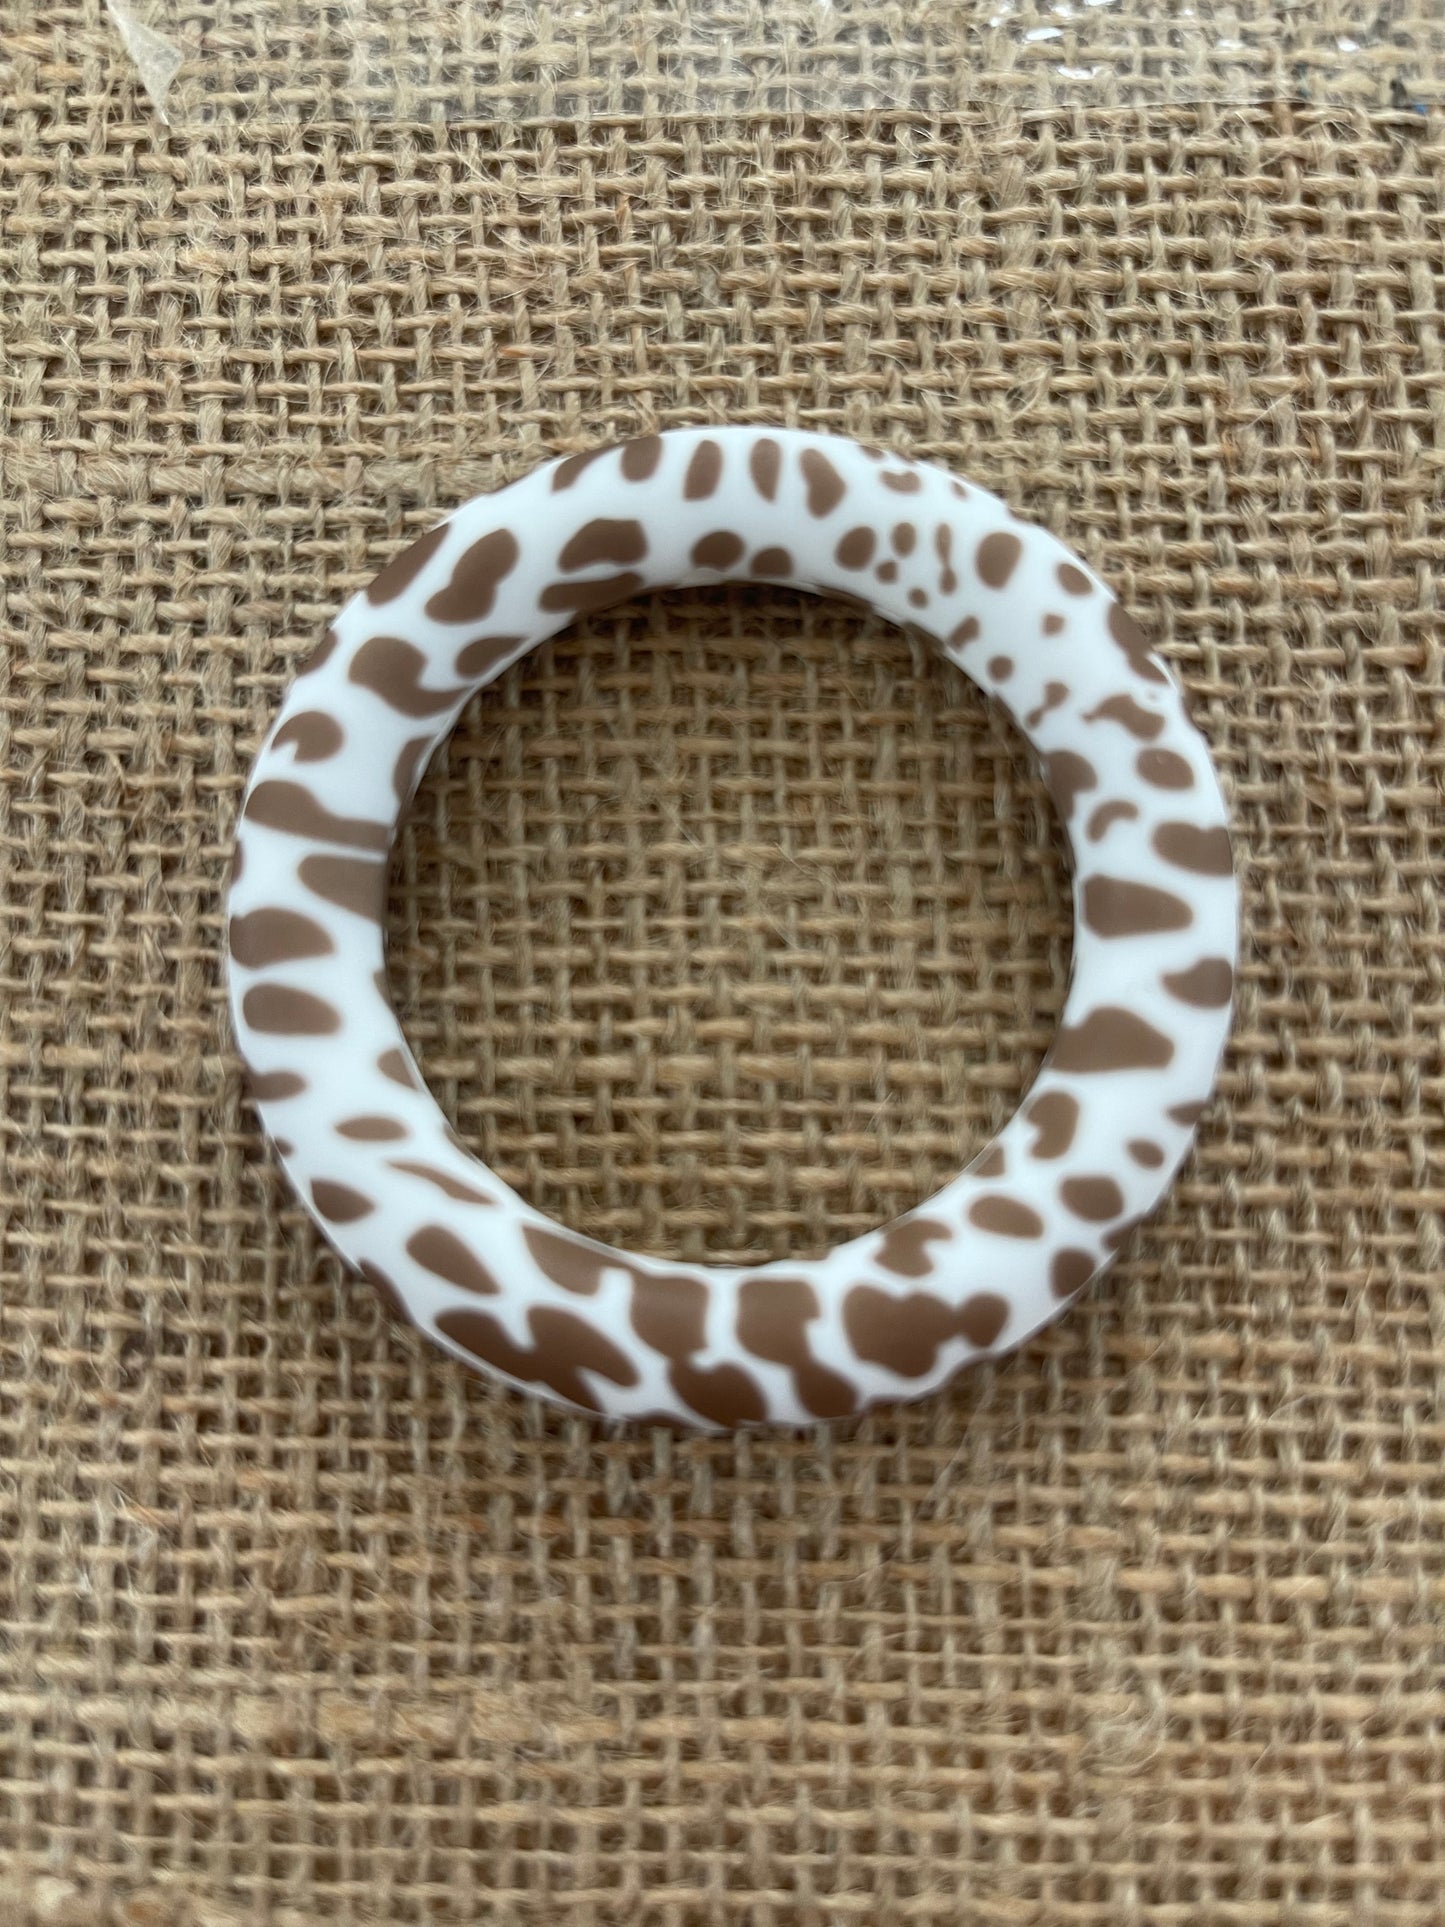 Round Silicone Rings